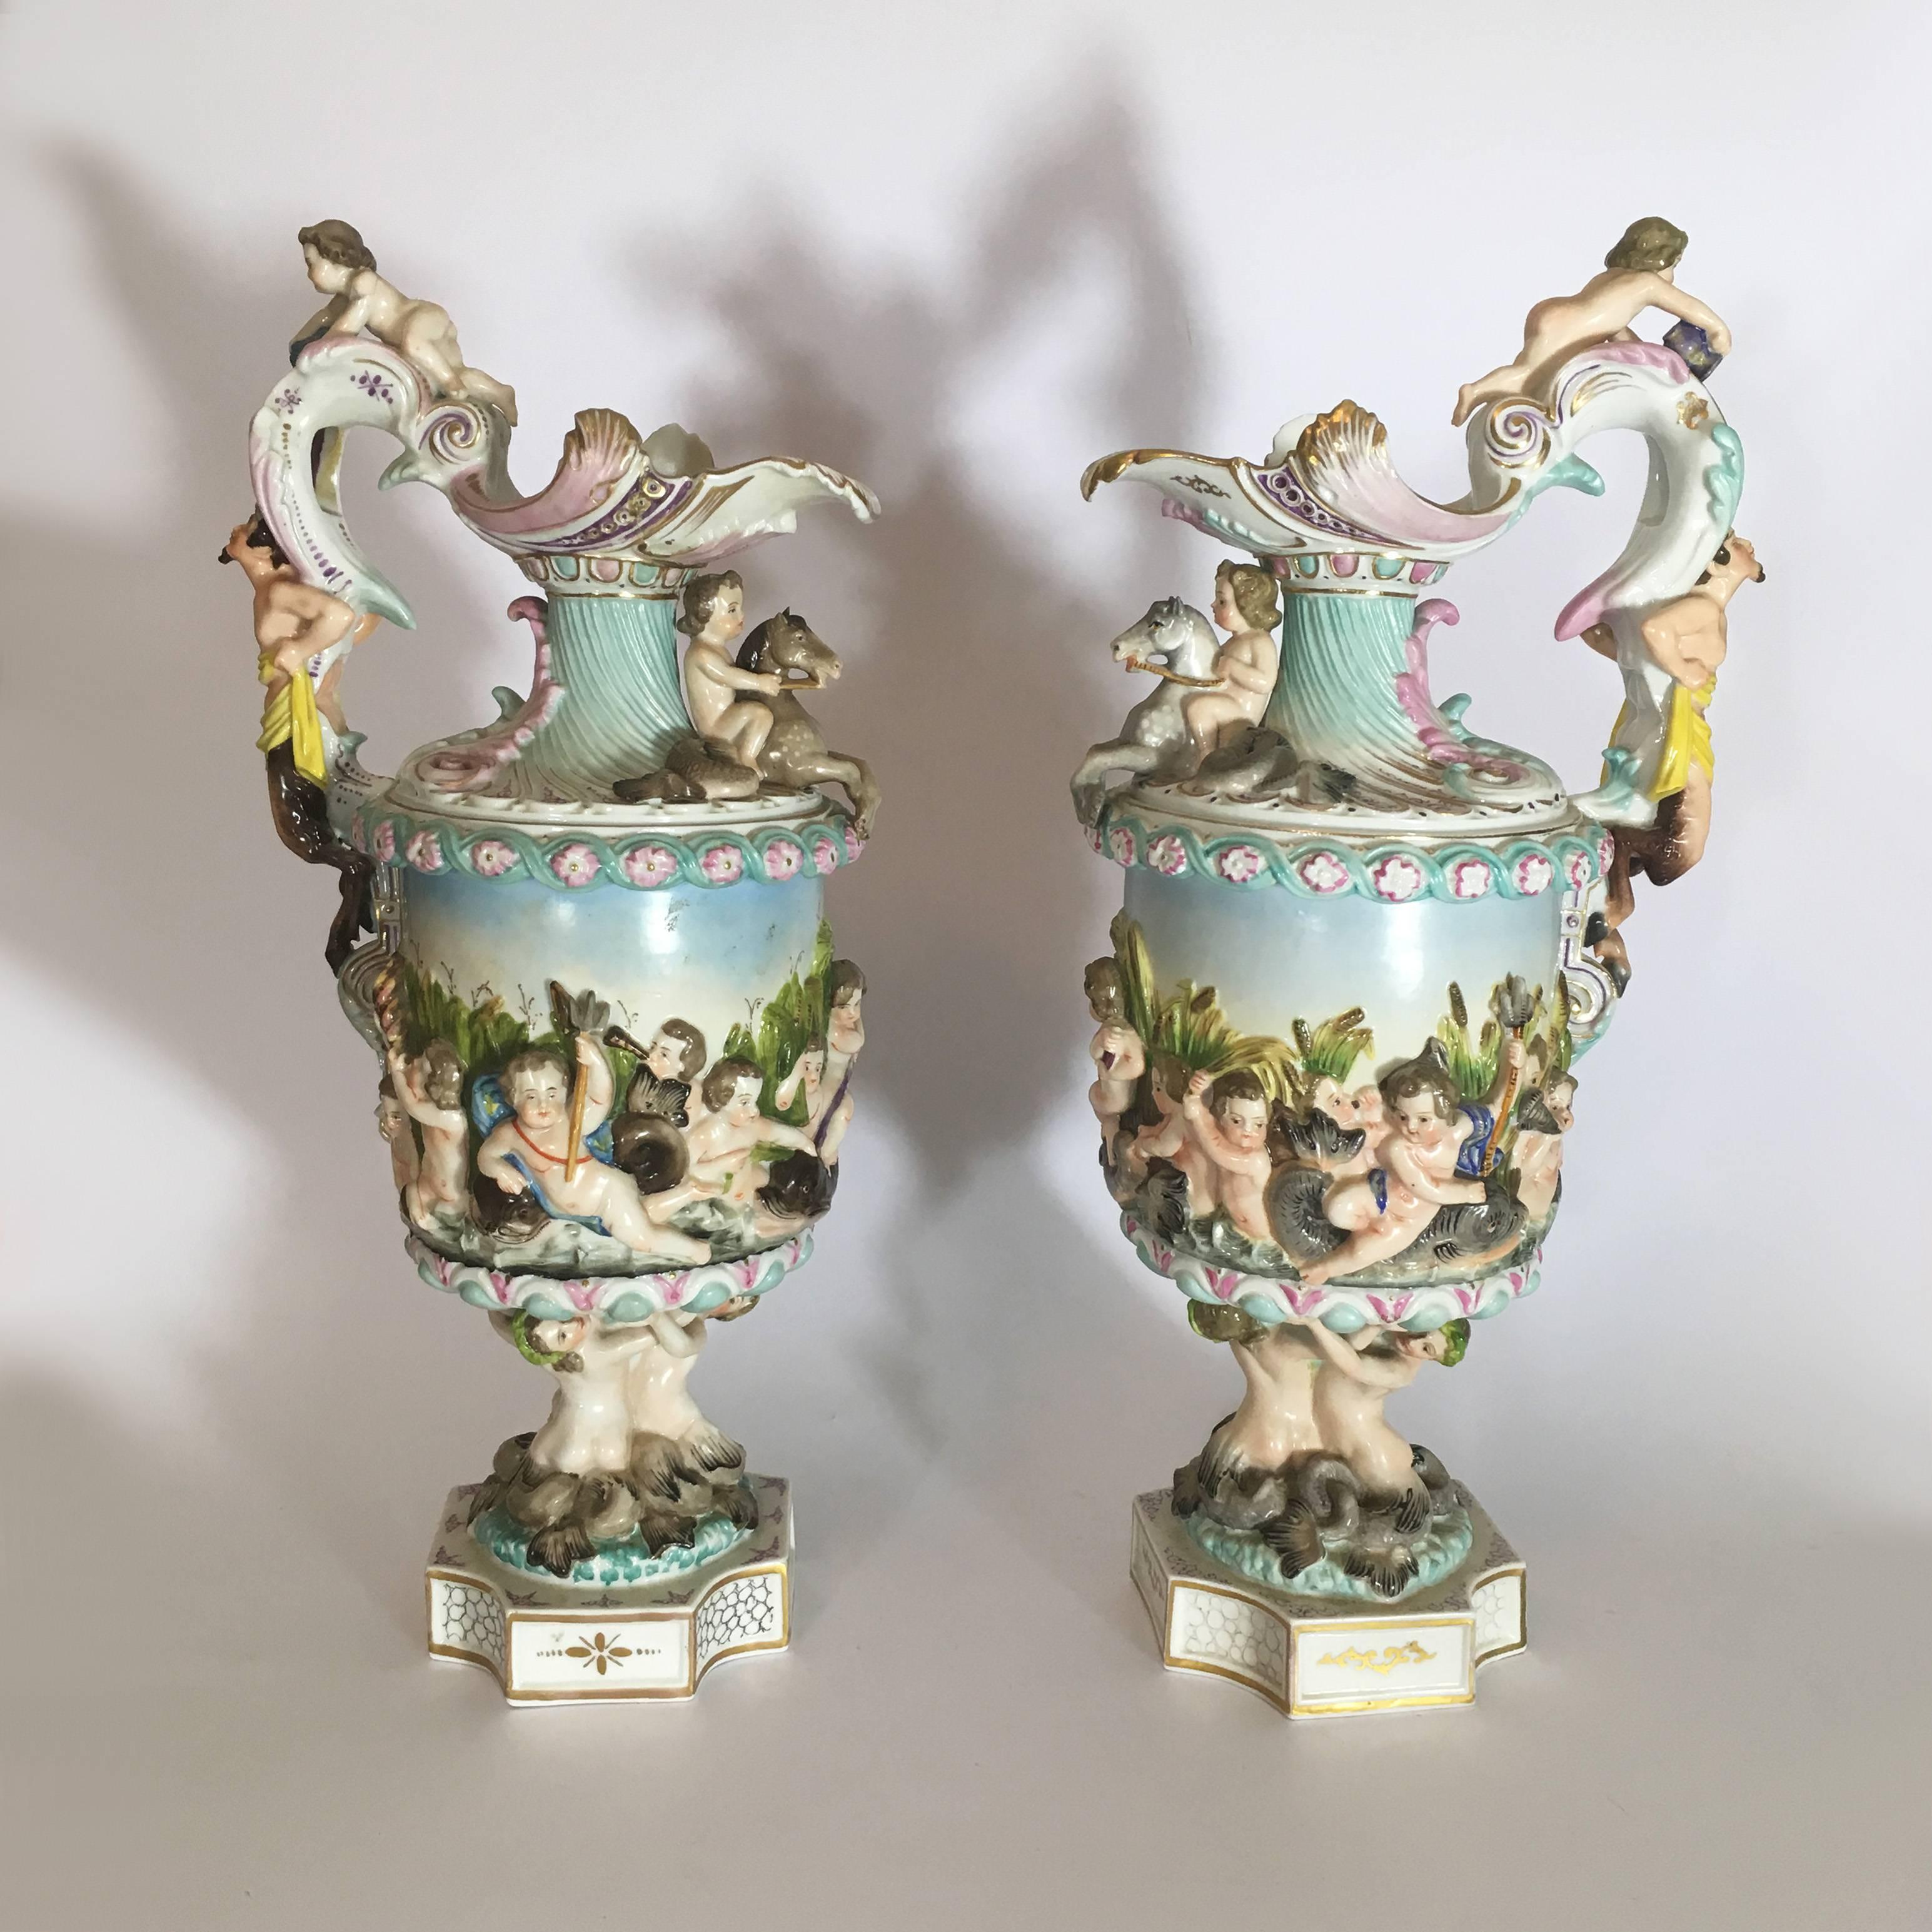 A stunning pair of antique Meissen porcelain ewers, featuring a maritime scene with dolphins, cherubs, mermaids and galloping horses. The ewer’s handles are presenting satyrs. Underneath the ewer’s bases are the Meissen symbols of blue crossed